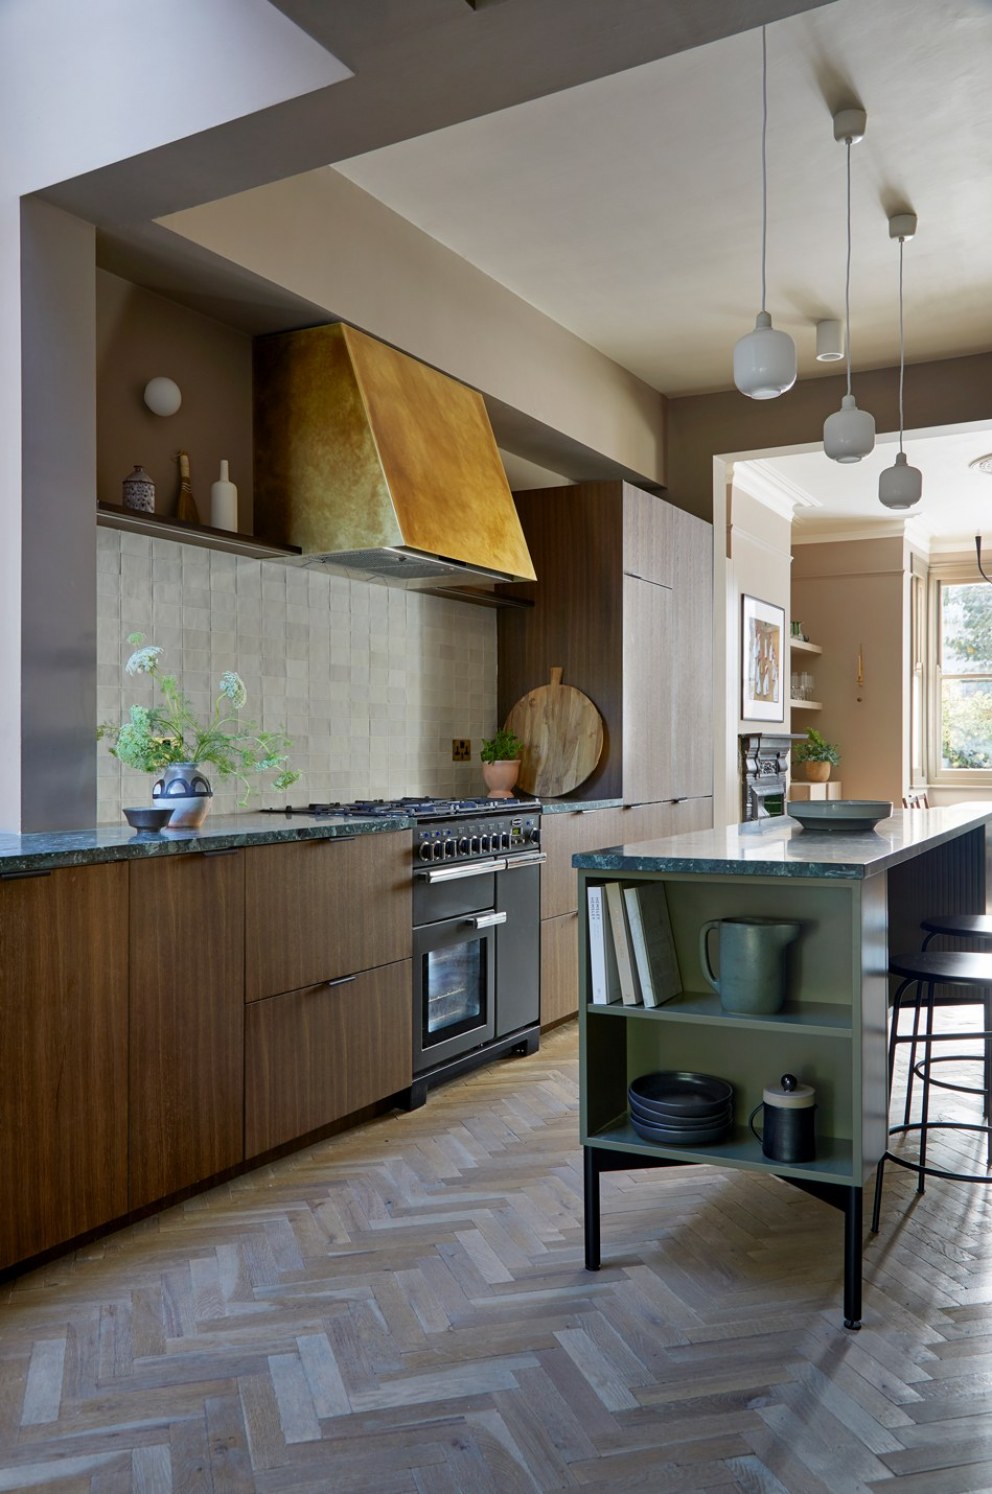 South West London Family Home | The kitchen | Interior Designers